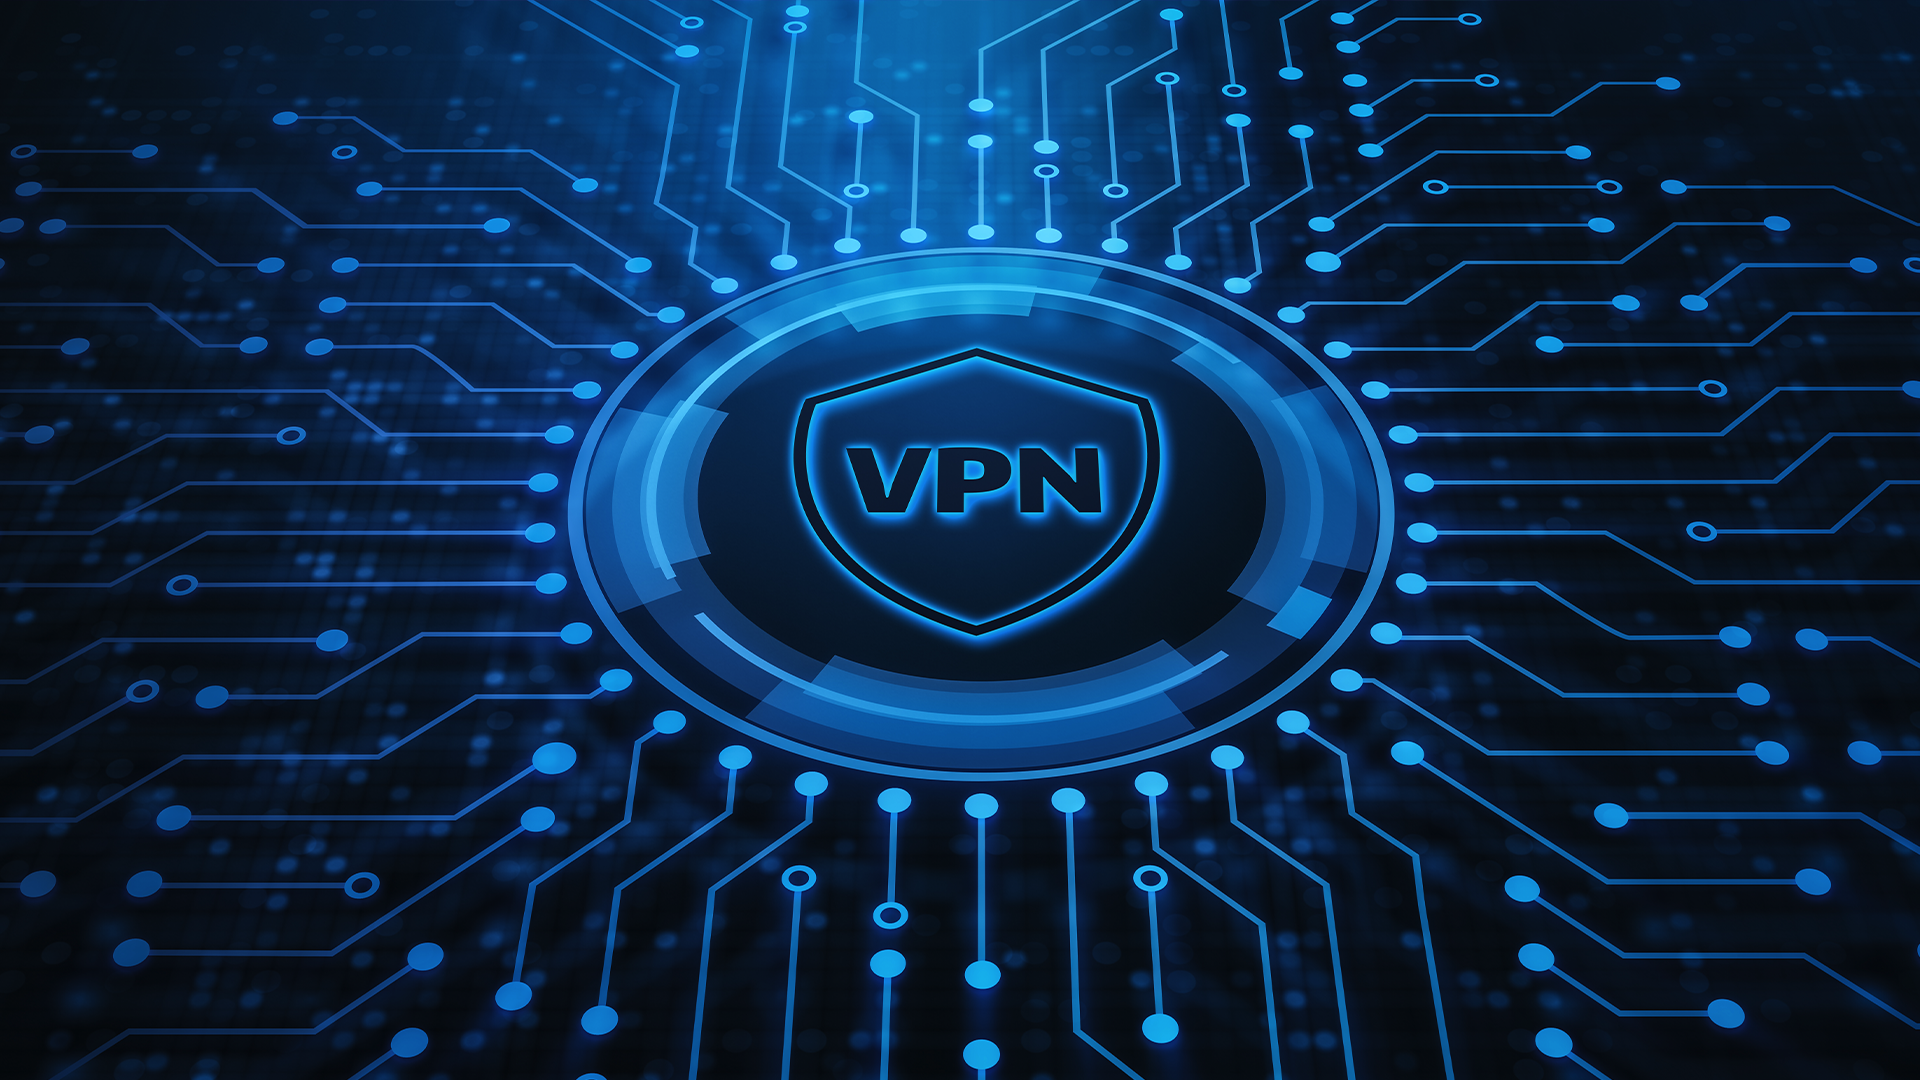 Does Your Internet Provider Know That You're Using a VPN?